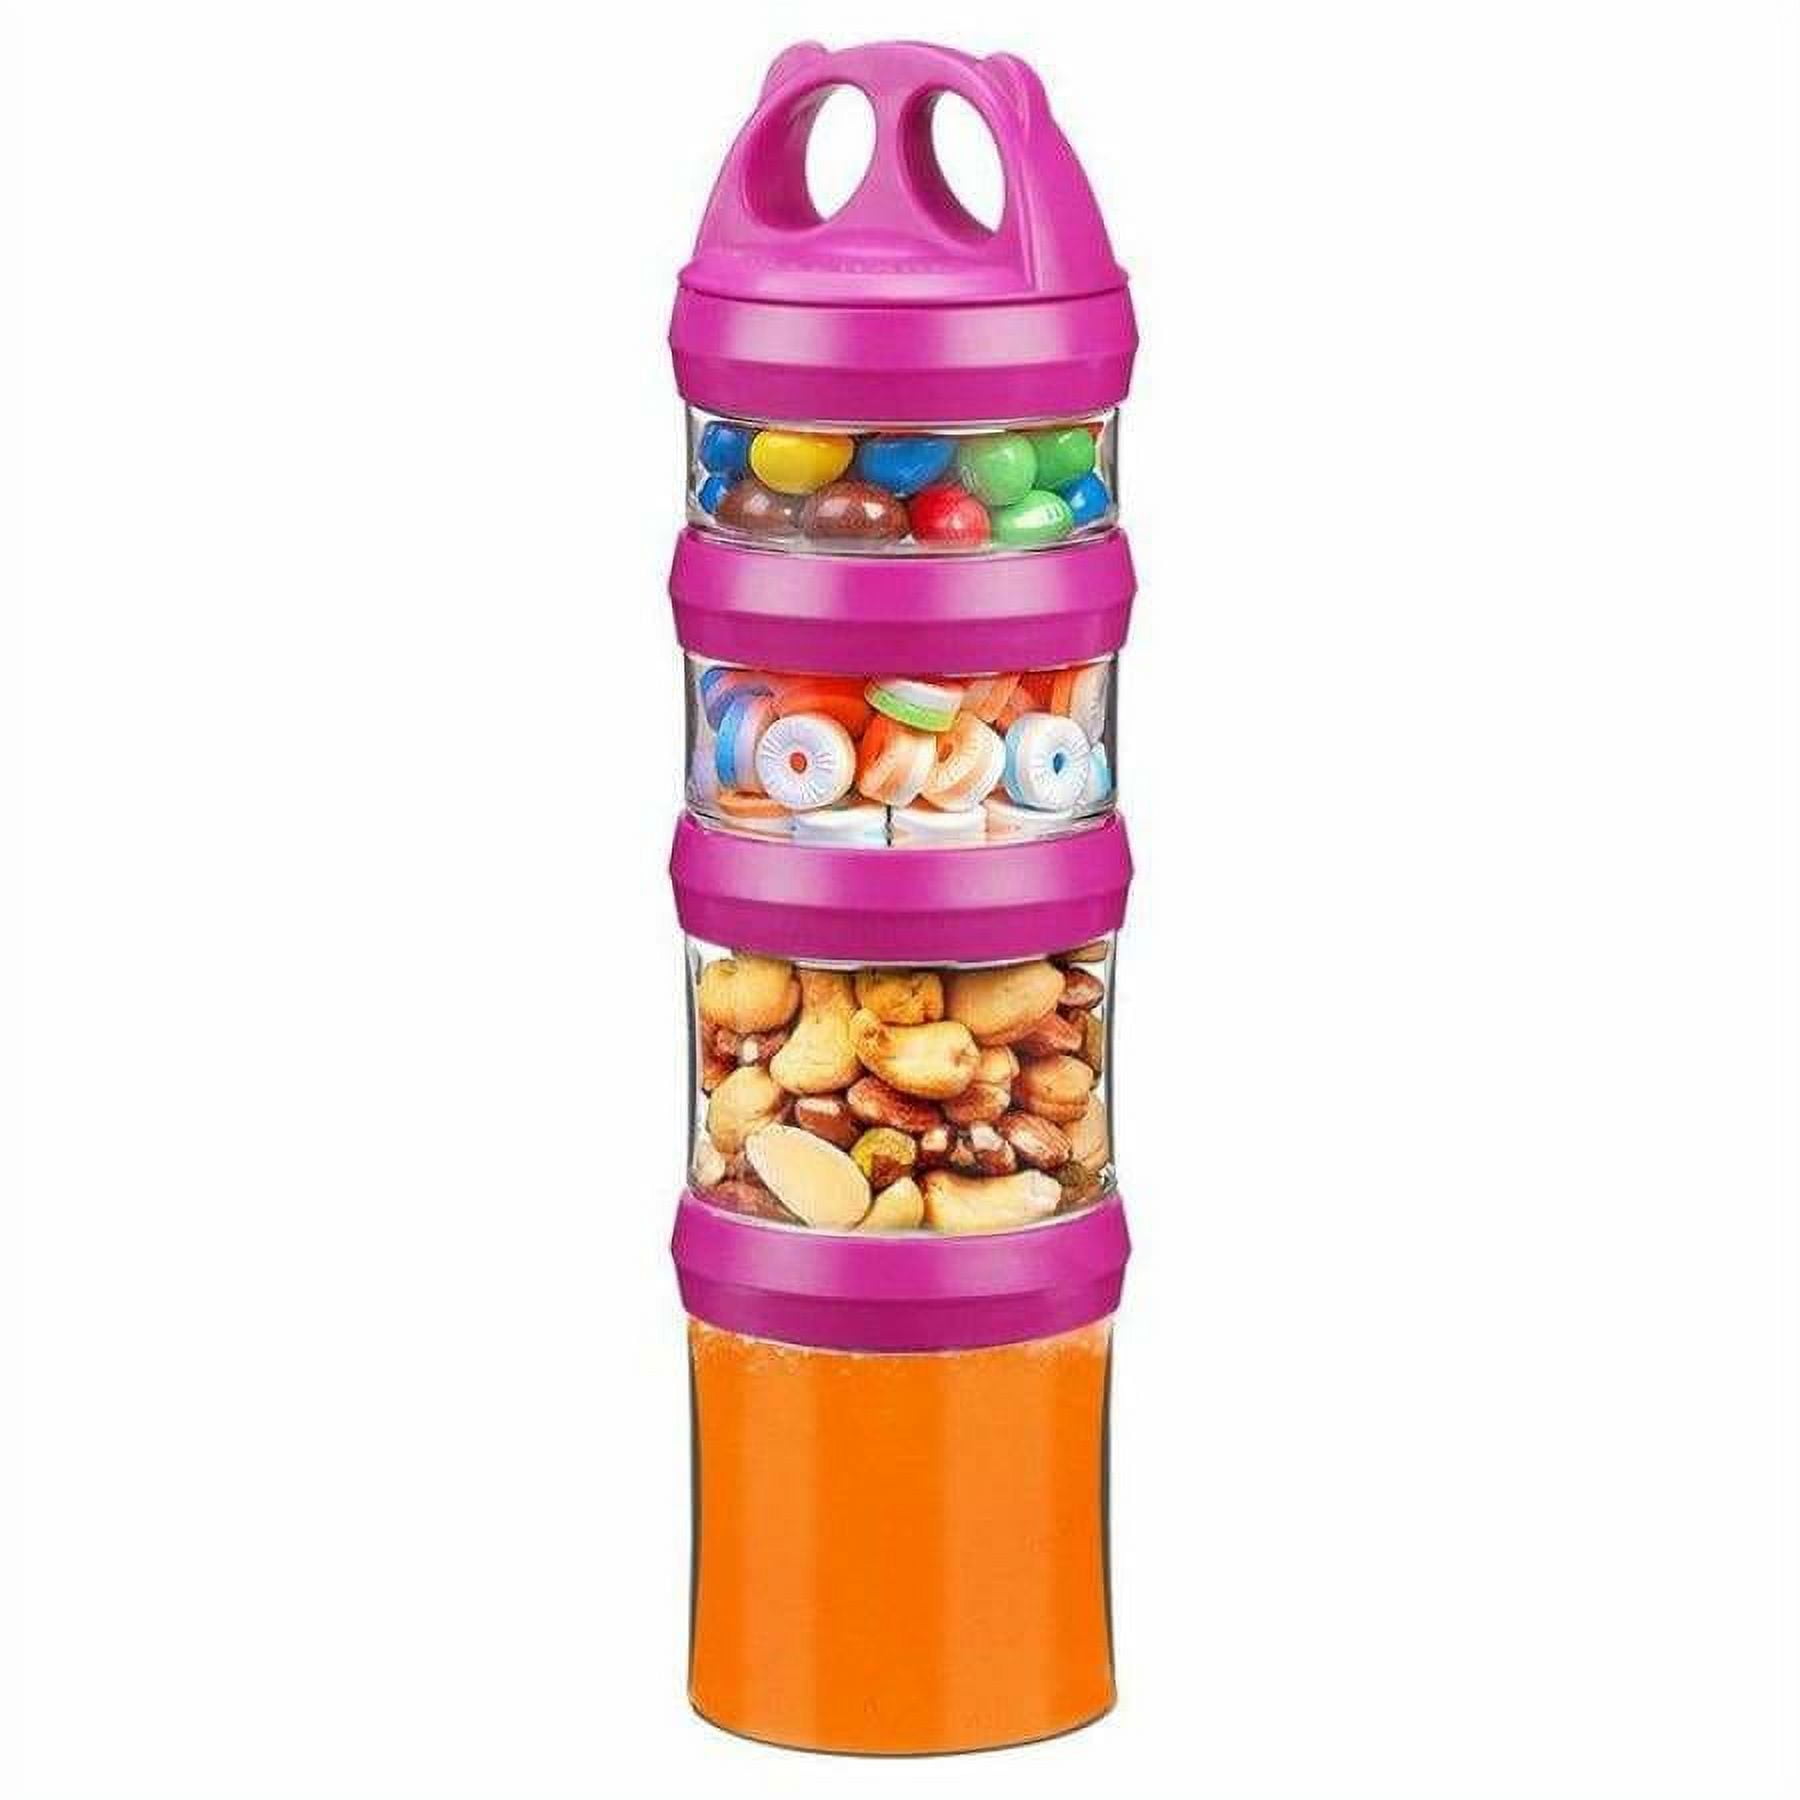 Marvel Black Panther Twist N' Lock Stackable Snack Packs Container,1pc